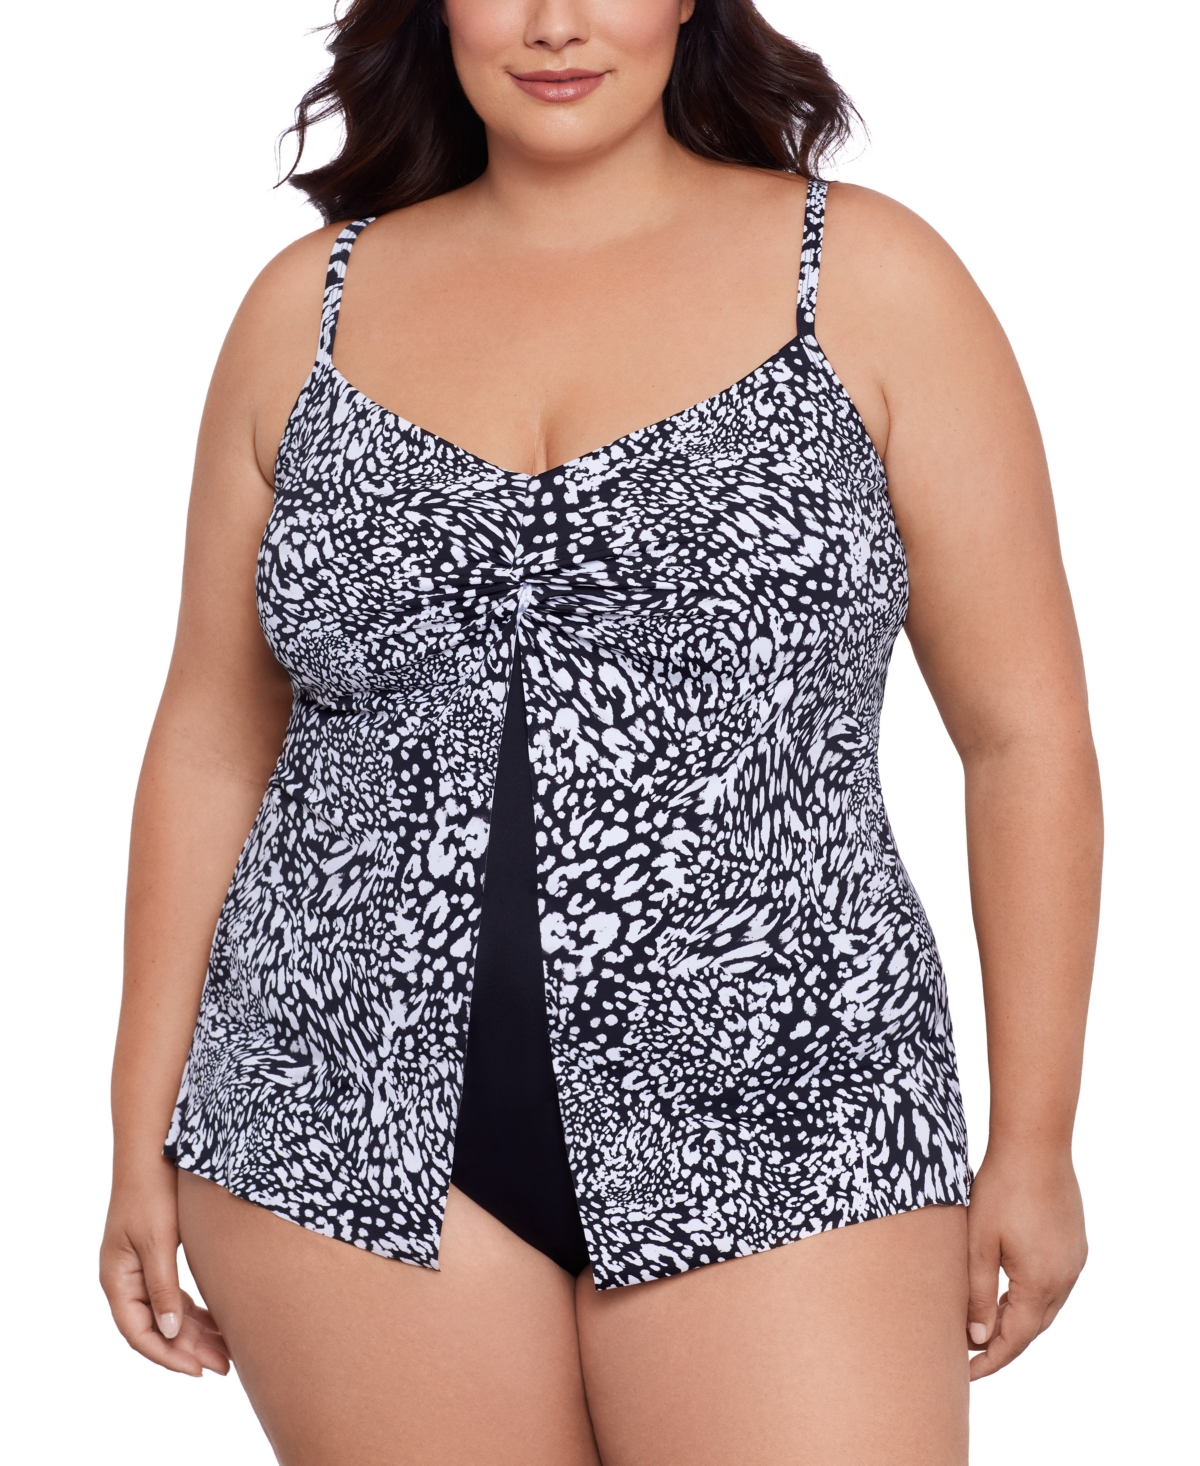 Plus Size Printed Flyaway Fauxkini One Piece, Created for Macy's - Leopard Swirl